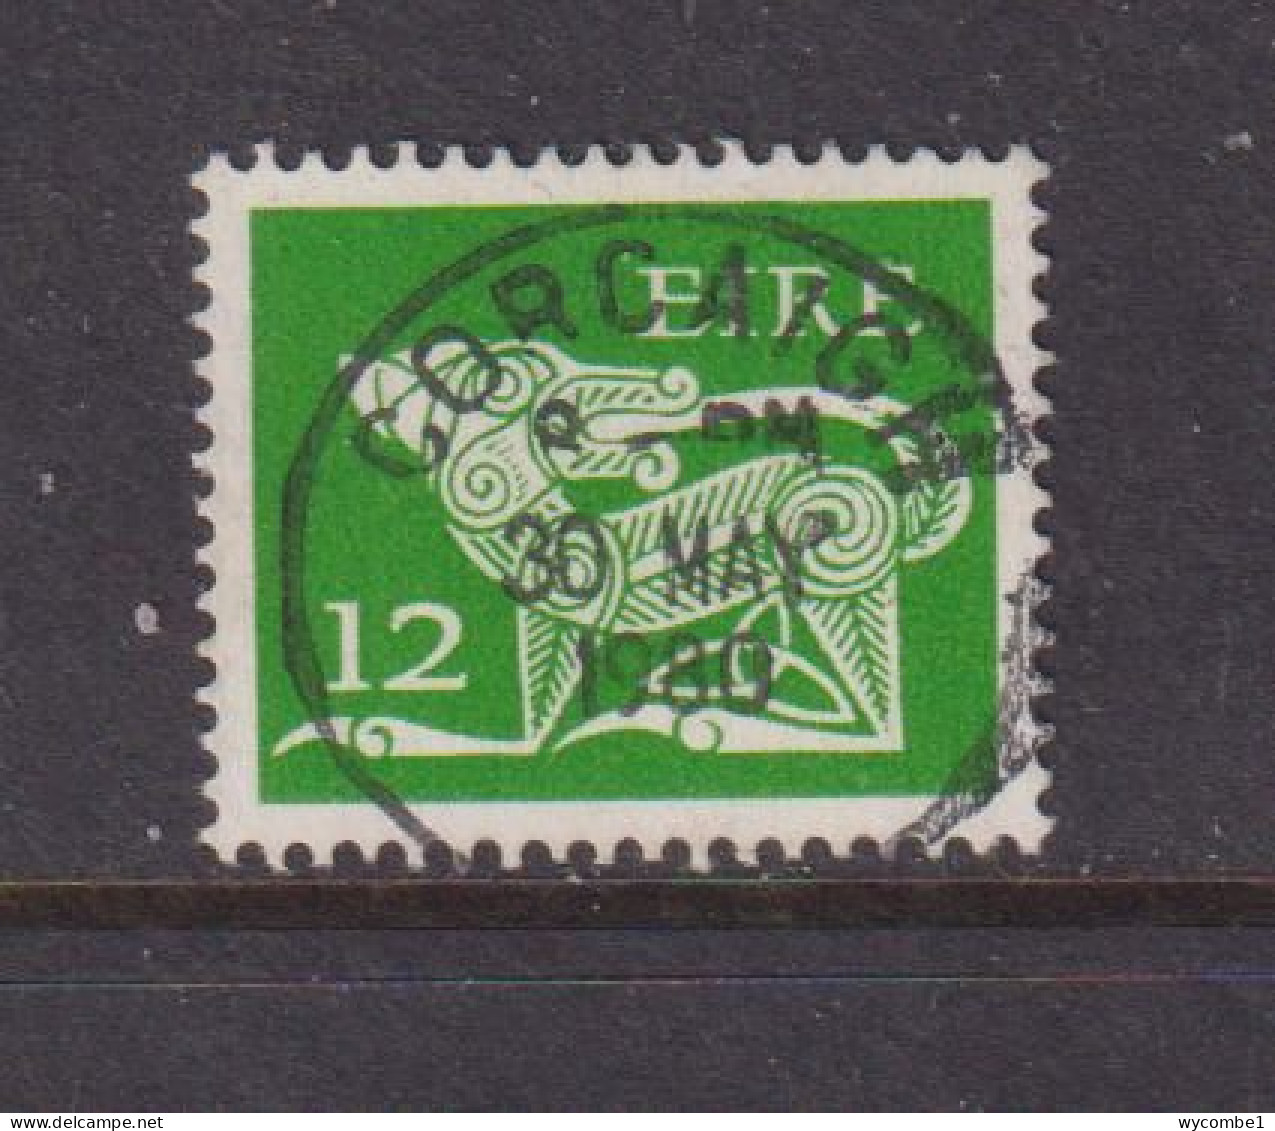 IRELAND - 1971  Decimal Currency Definitives  12p Used As Scan - Gebraucht